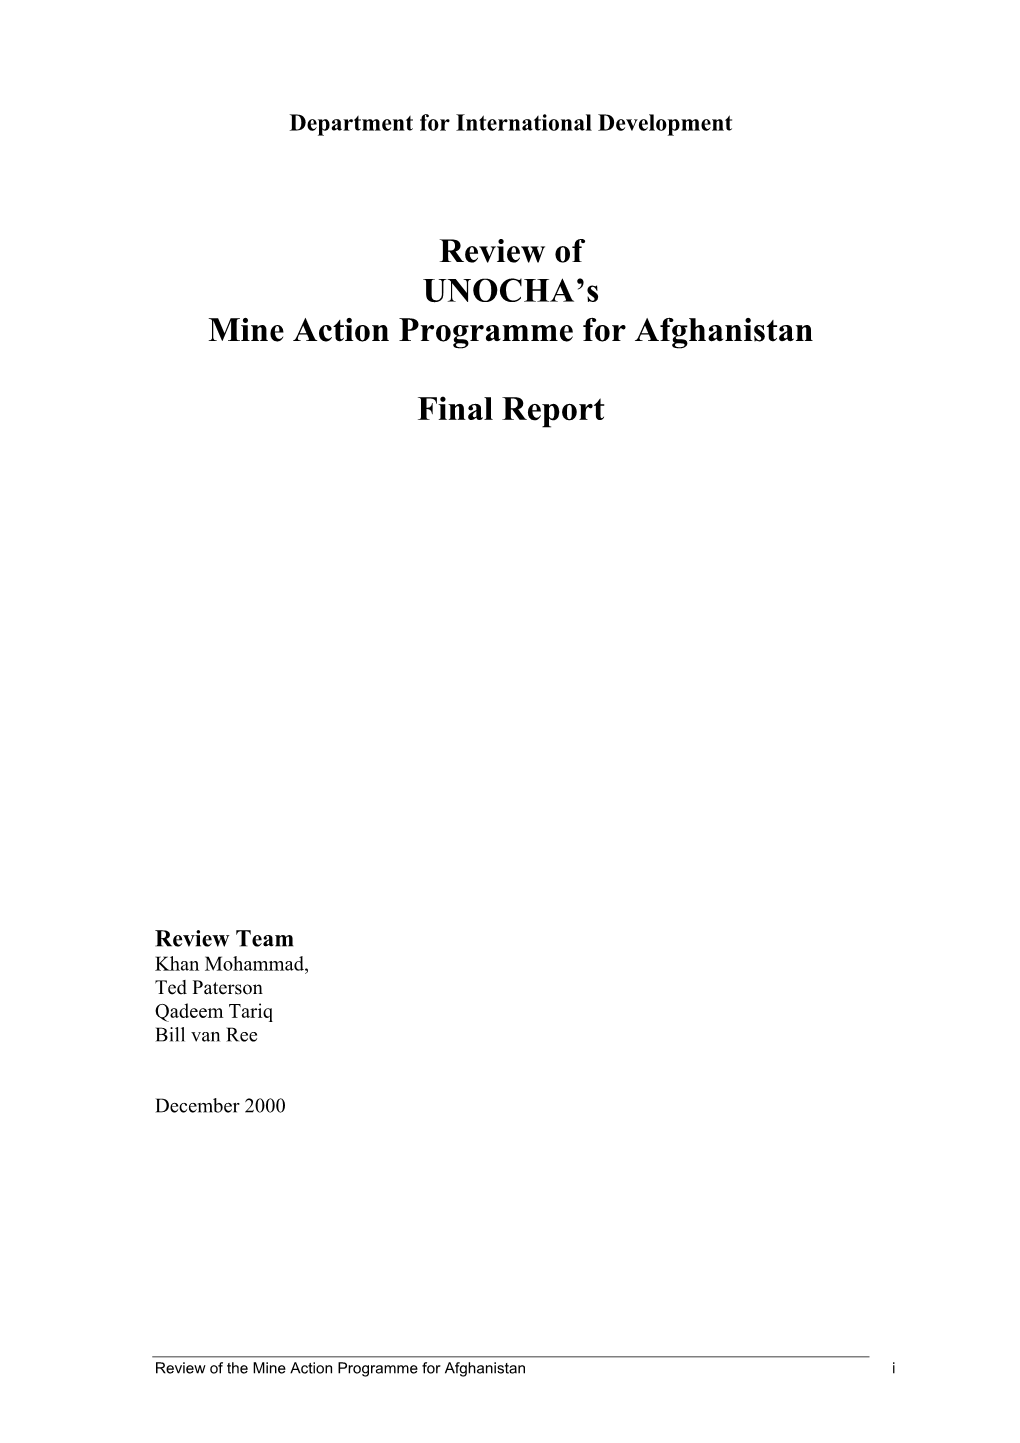 Review of UNOCHA's Mine Action Programme for Afghanistan Final